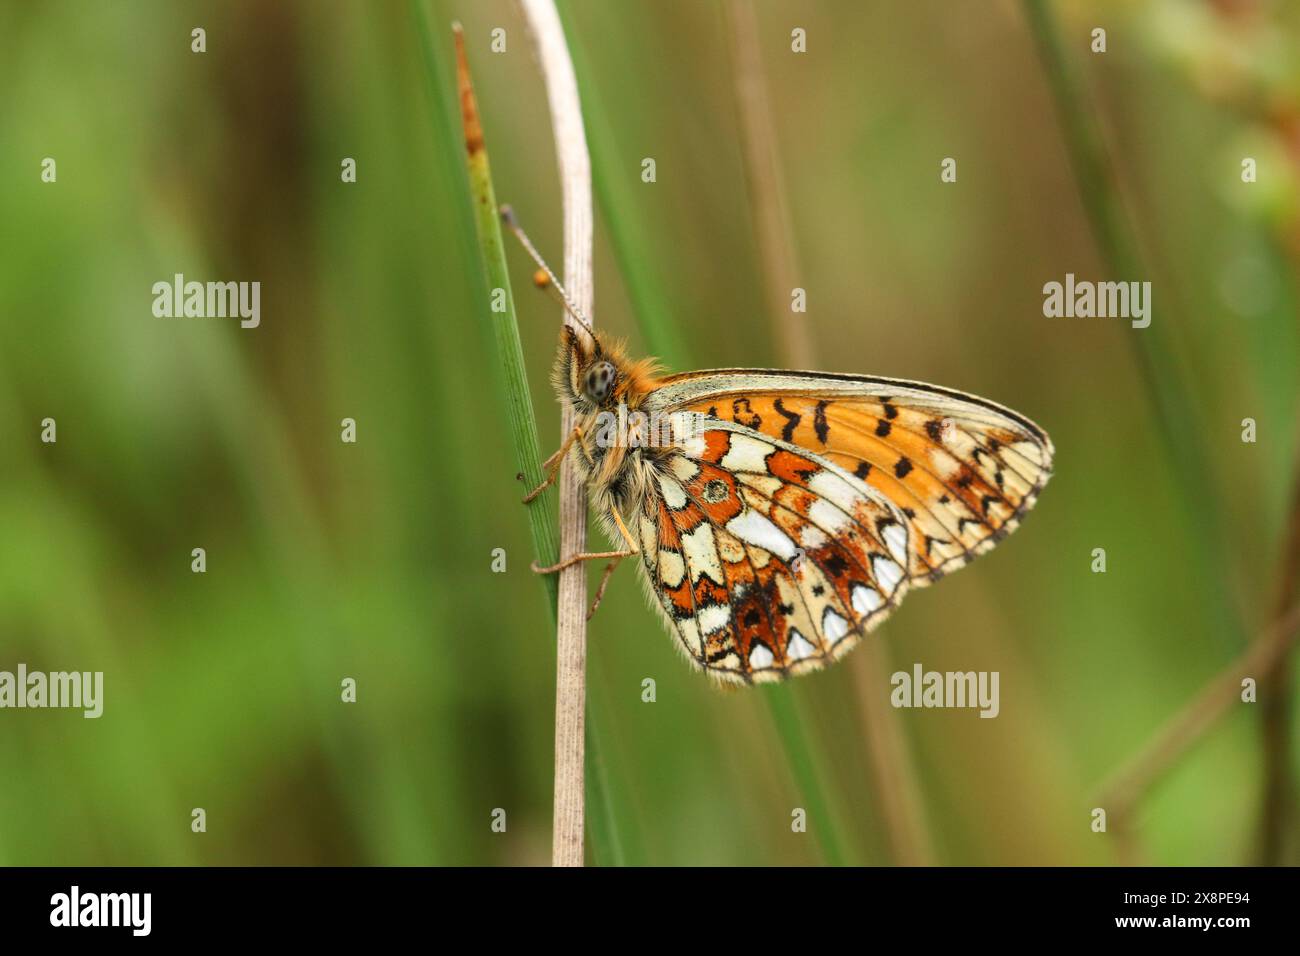 The side view of a rare Small Pearl-bordered Fritillary, Boloria selene, resting on a plant stem in a woodland clearing. Stock Photo